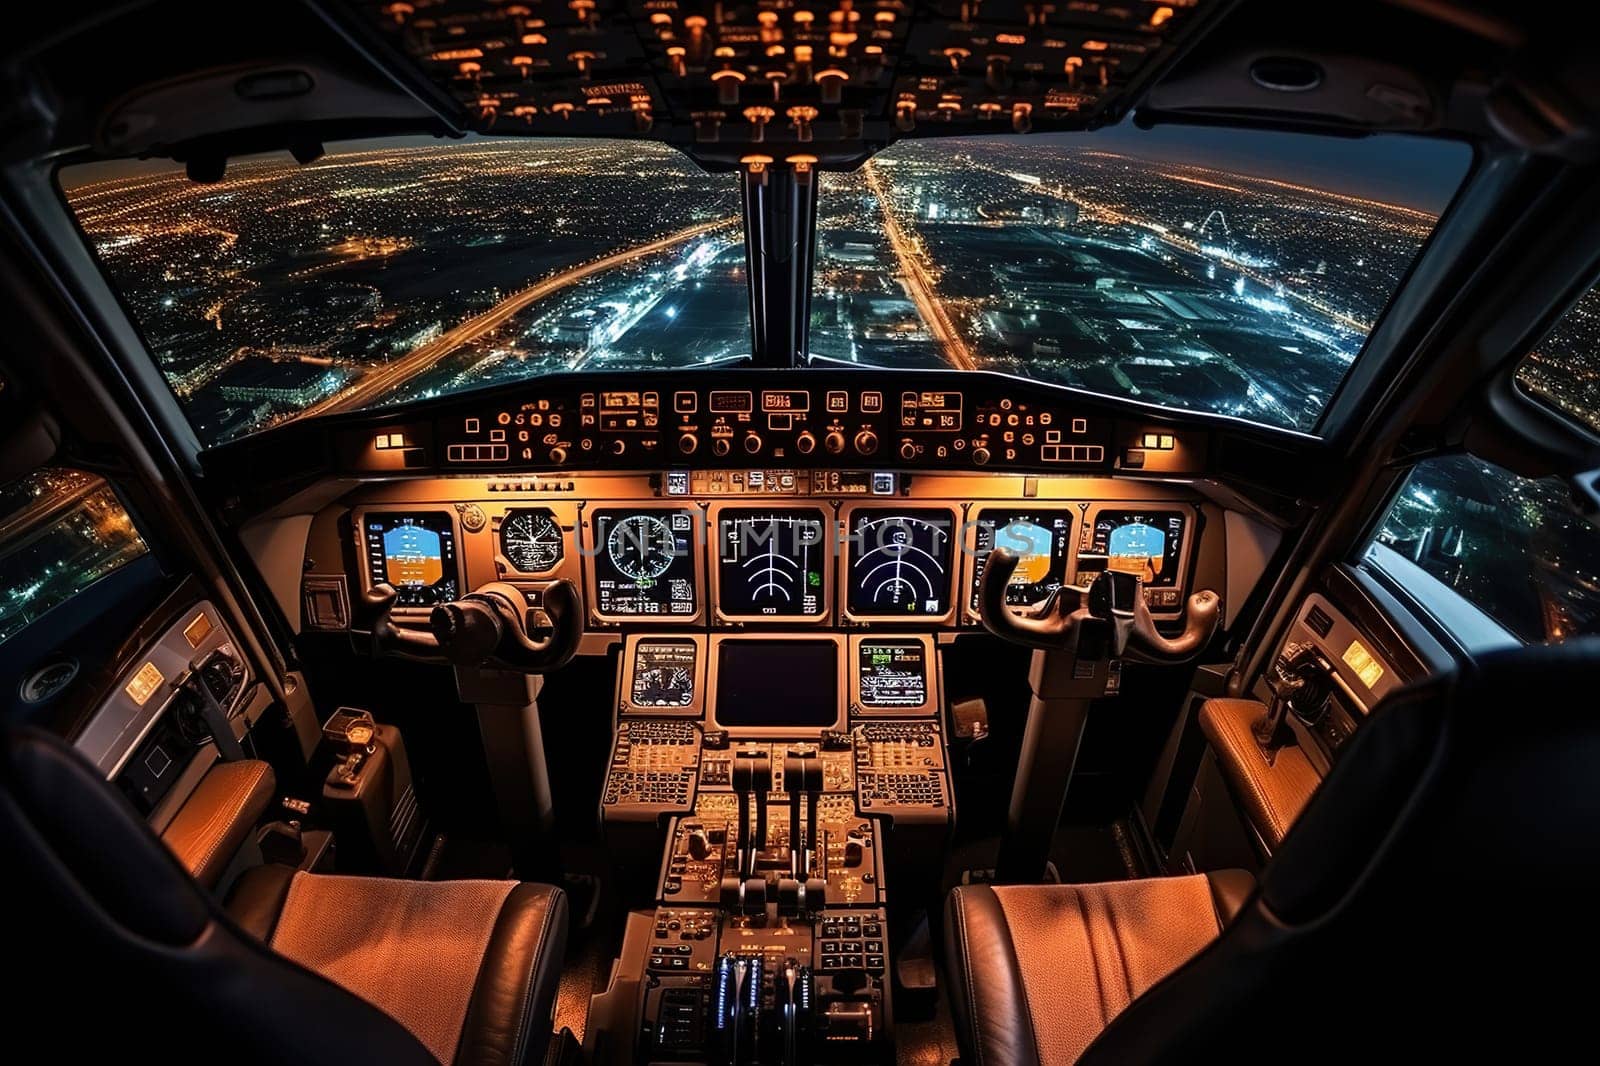 Inside view of an airplane cockpit with a glowing instrument panel.